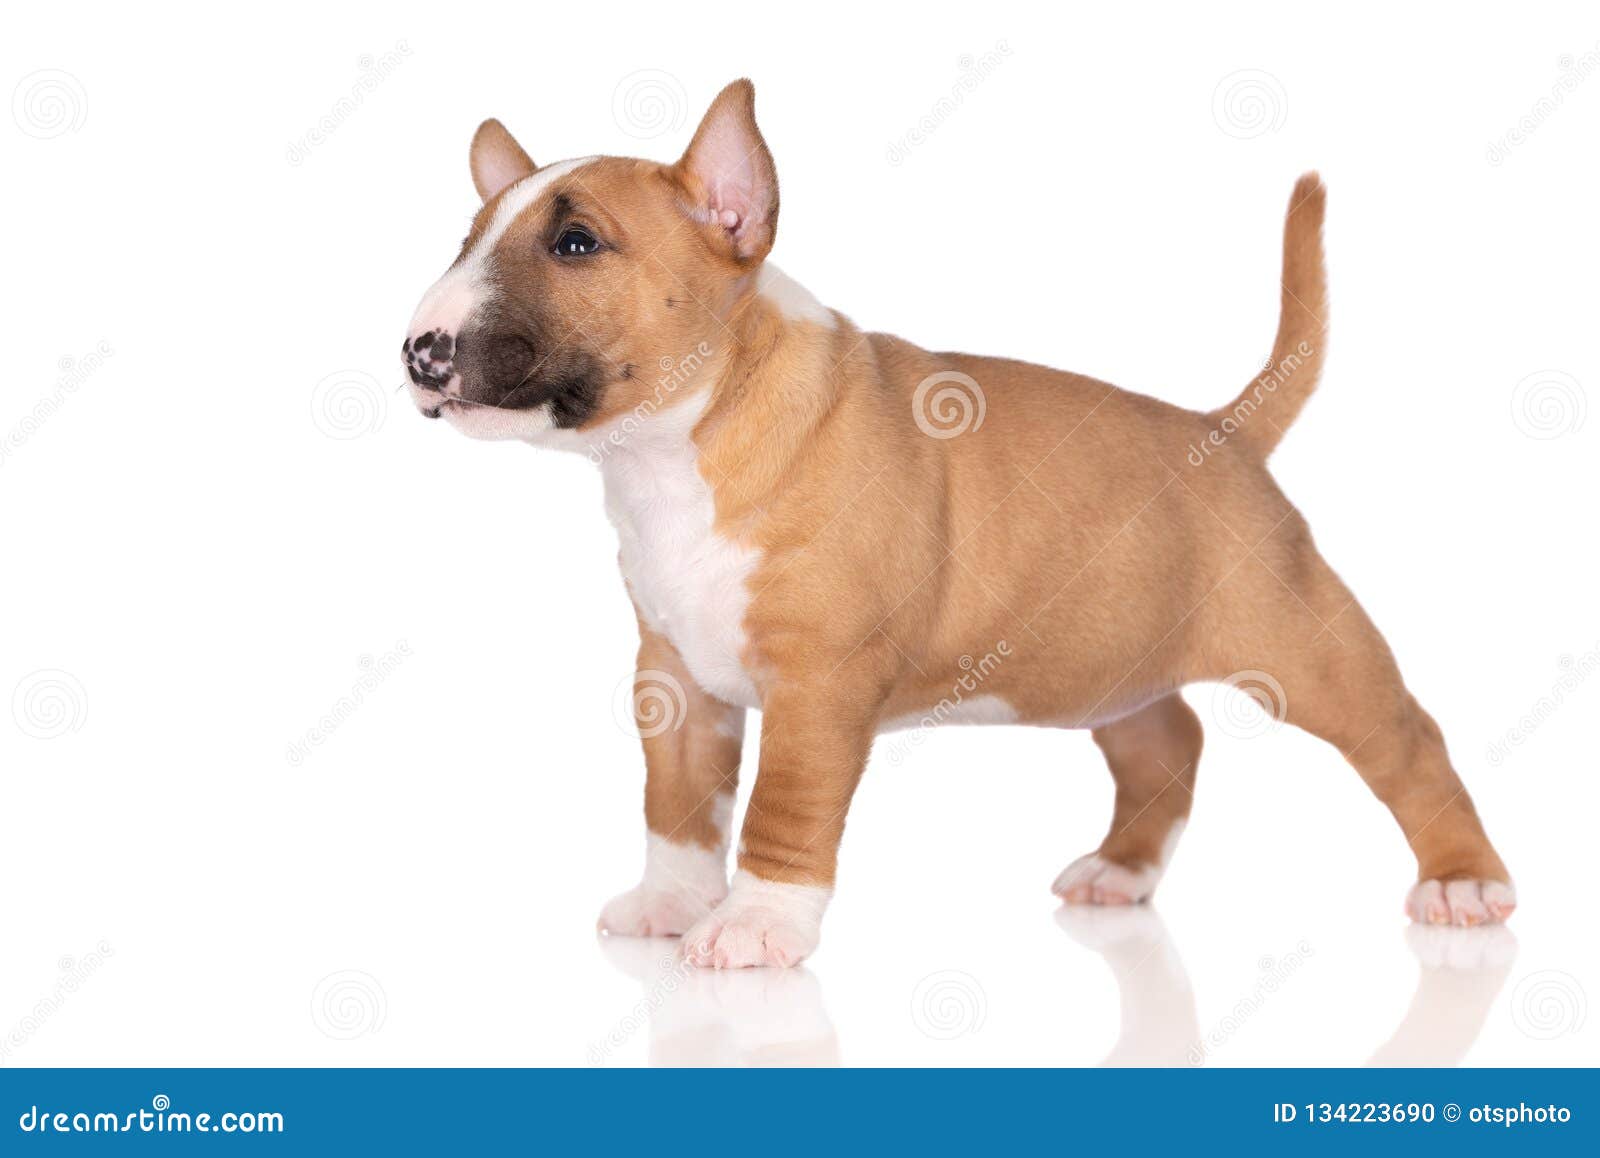 Miniature Bull Terrier Puppy On White Background Stock Photo Image Of Small Posing 134223690